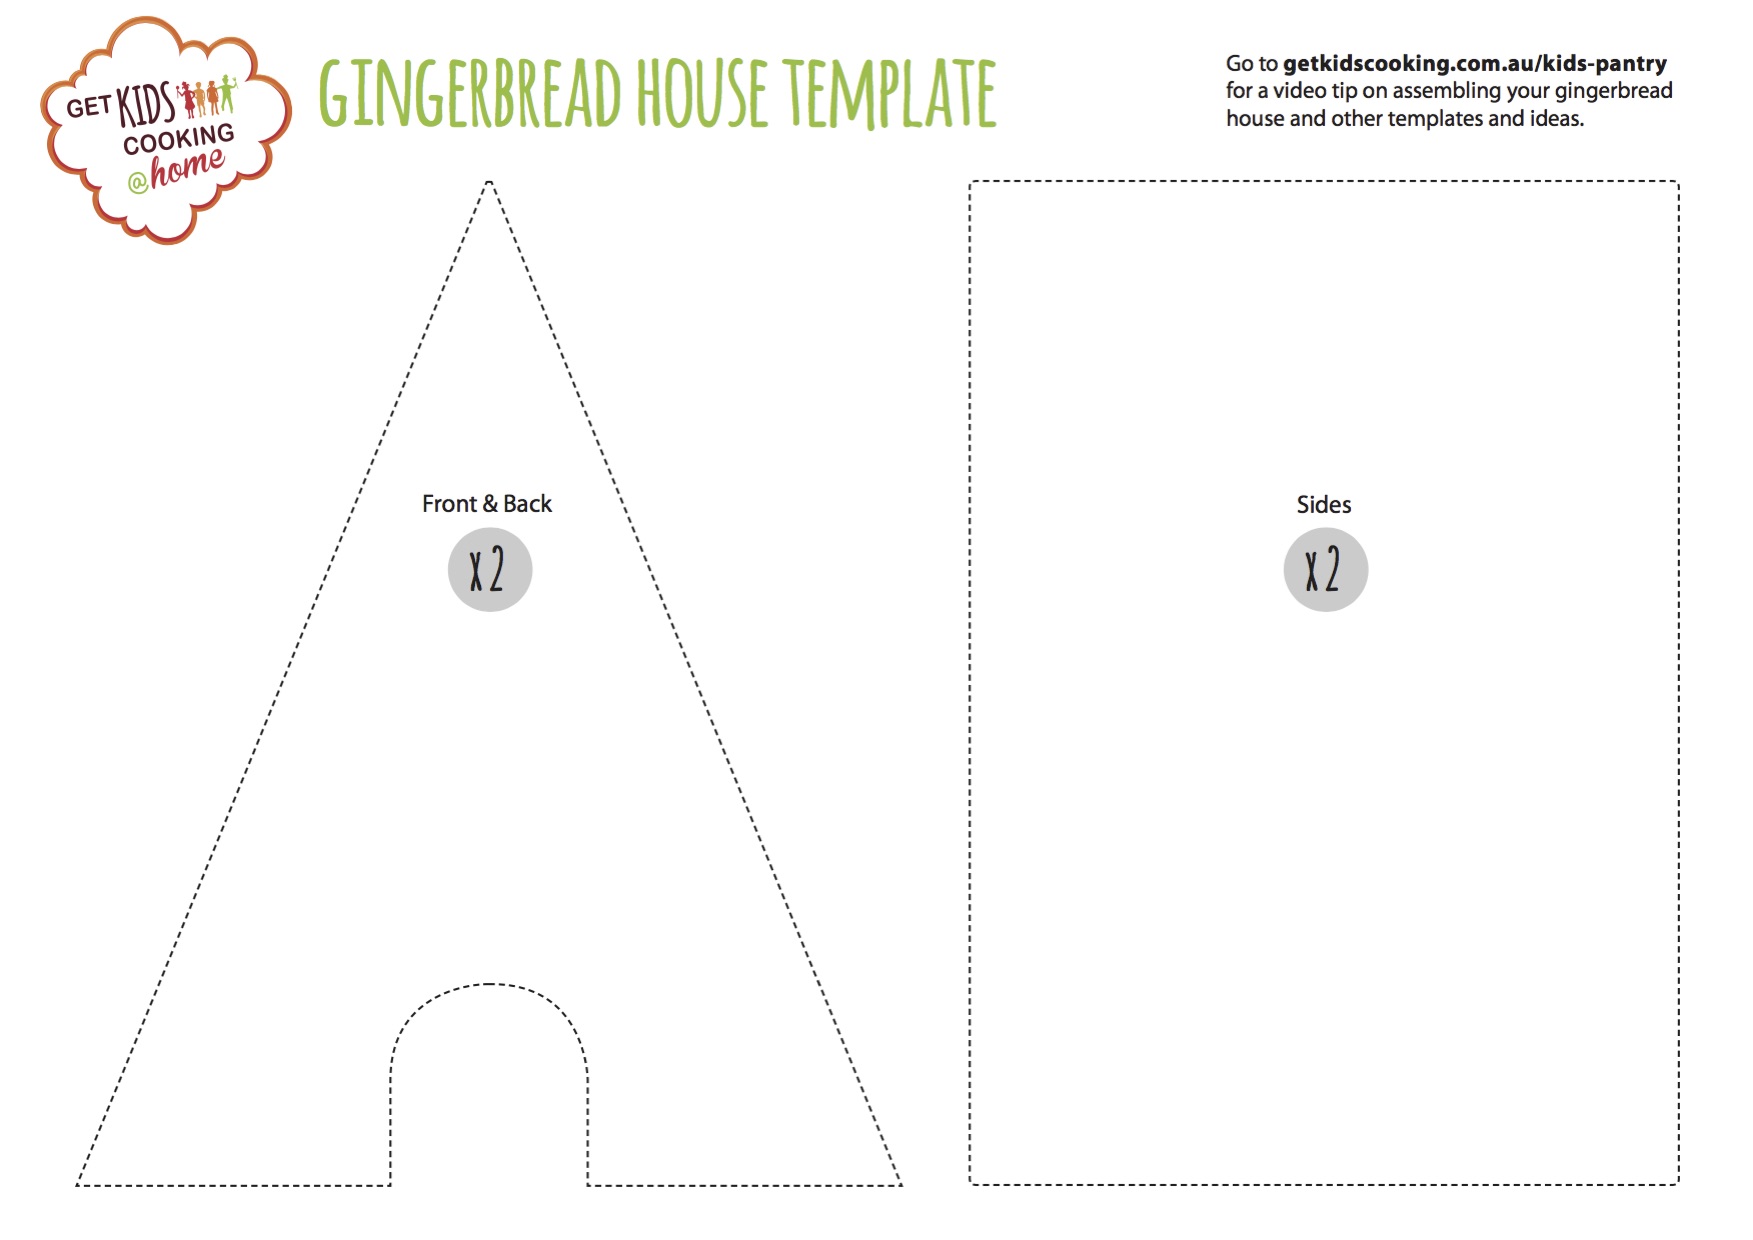 Gingerbread House Template Get Kids Cooking Inventors of The